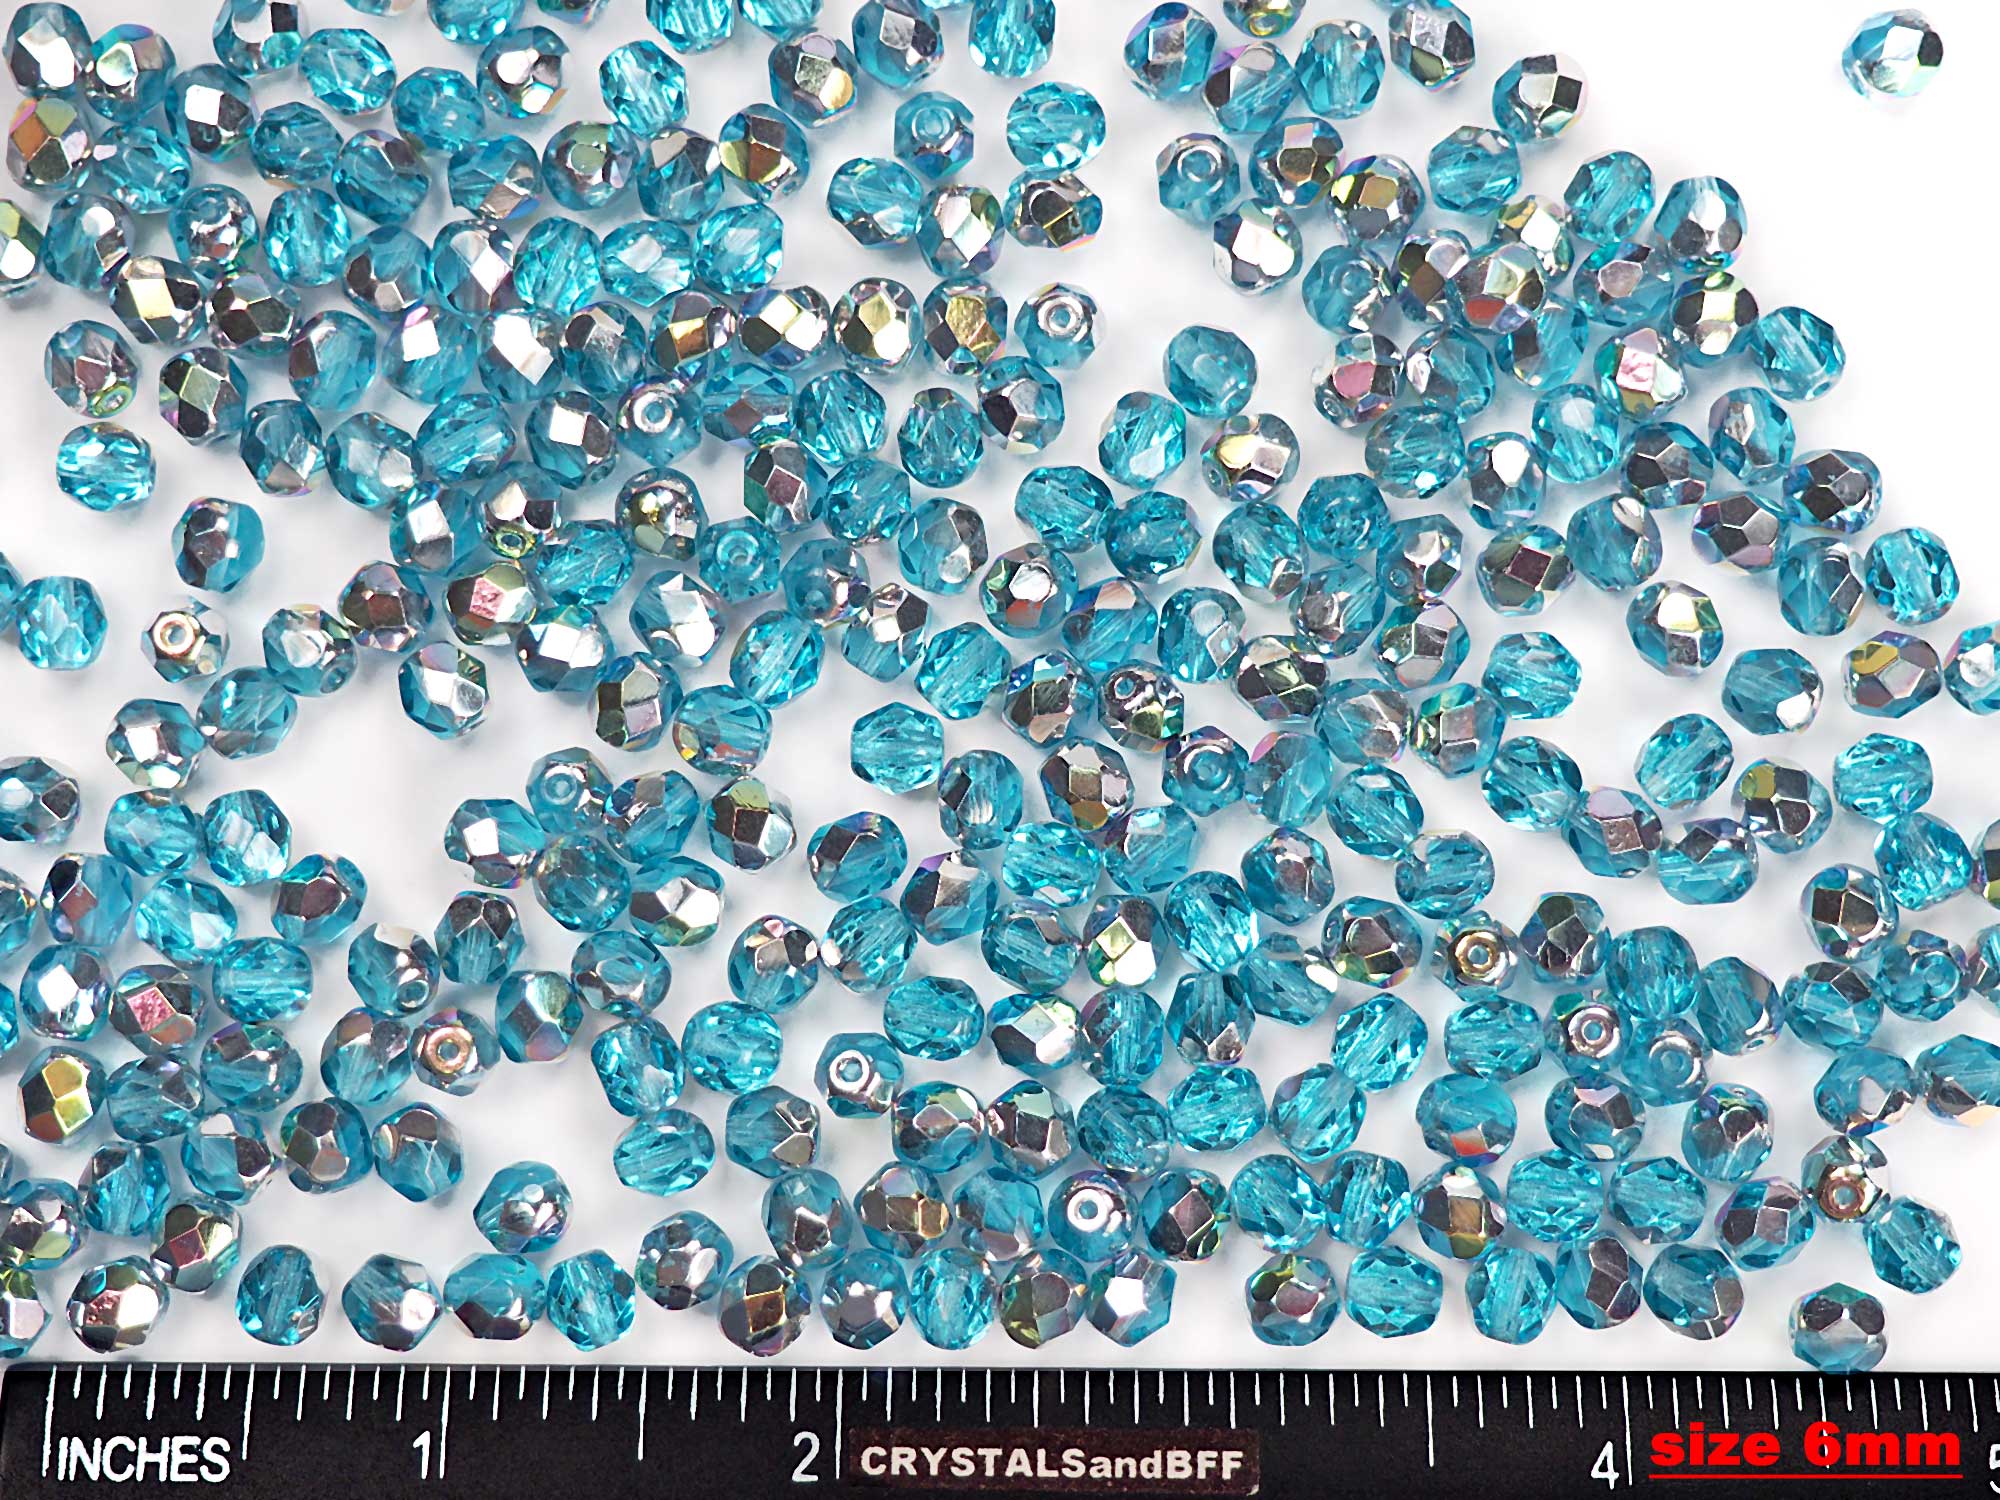 Aqua VL Vitrail Light coated, loose Czech Fire Polished Round Faceted Glass Beads, 4mm, 6mm